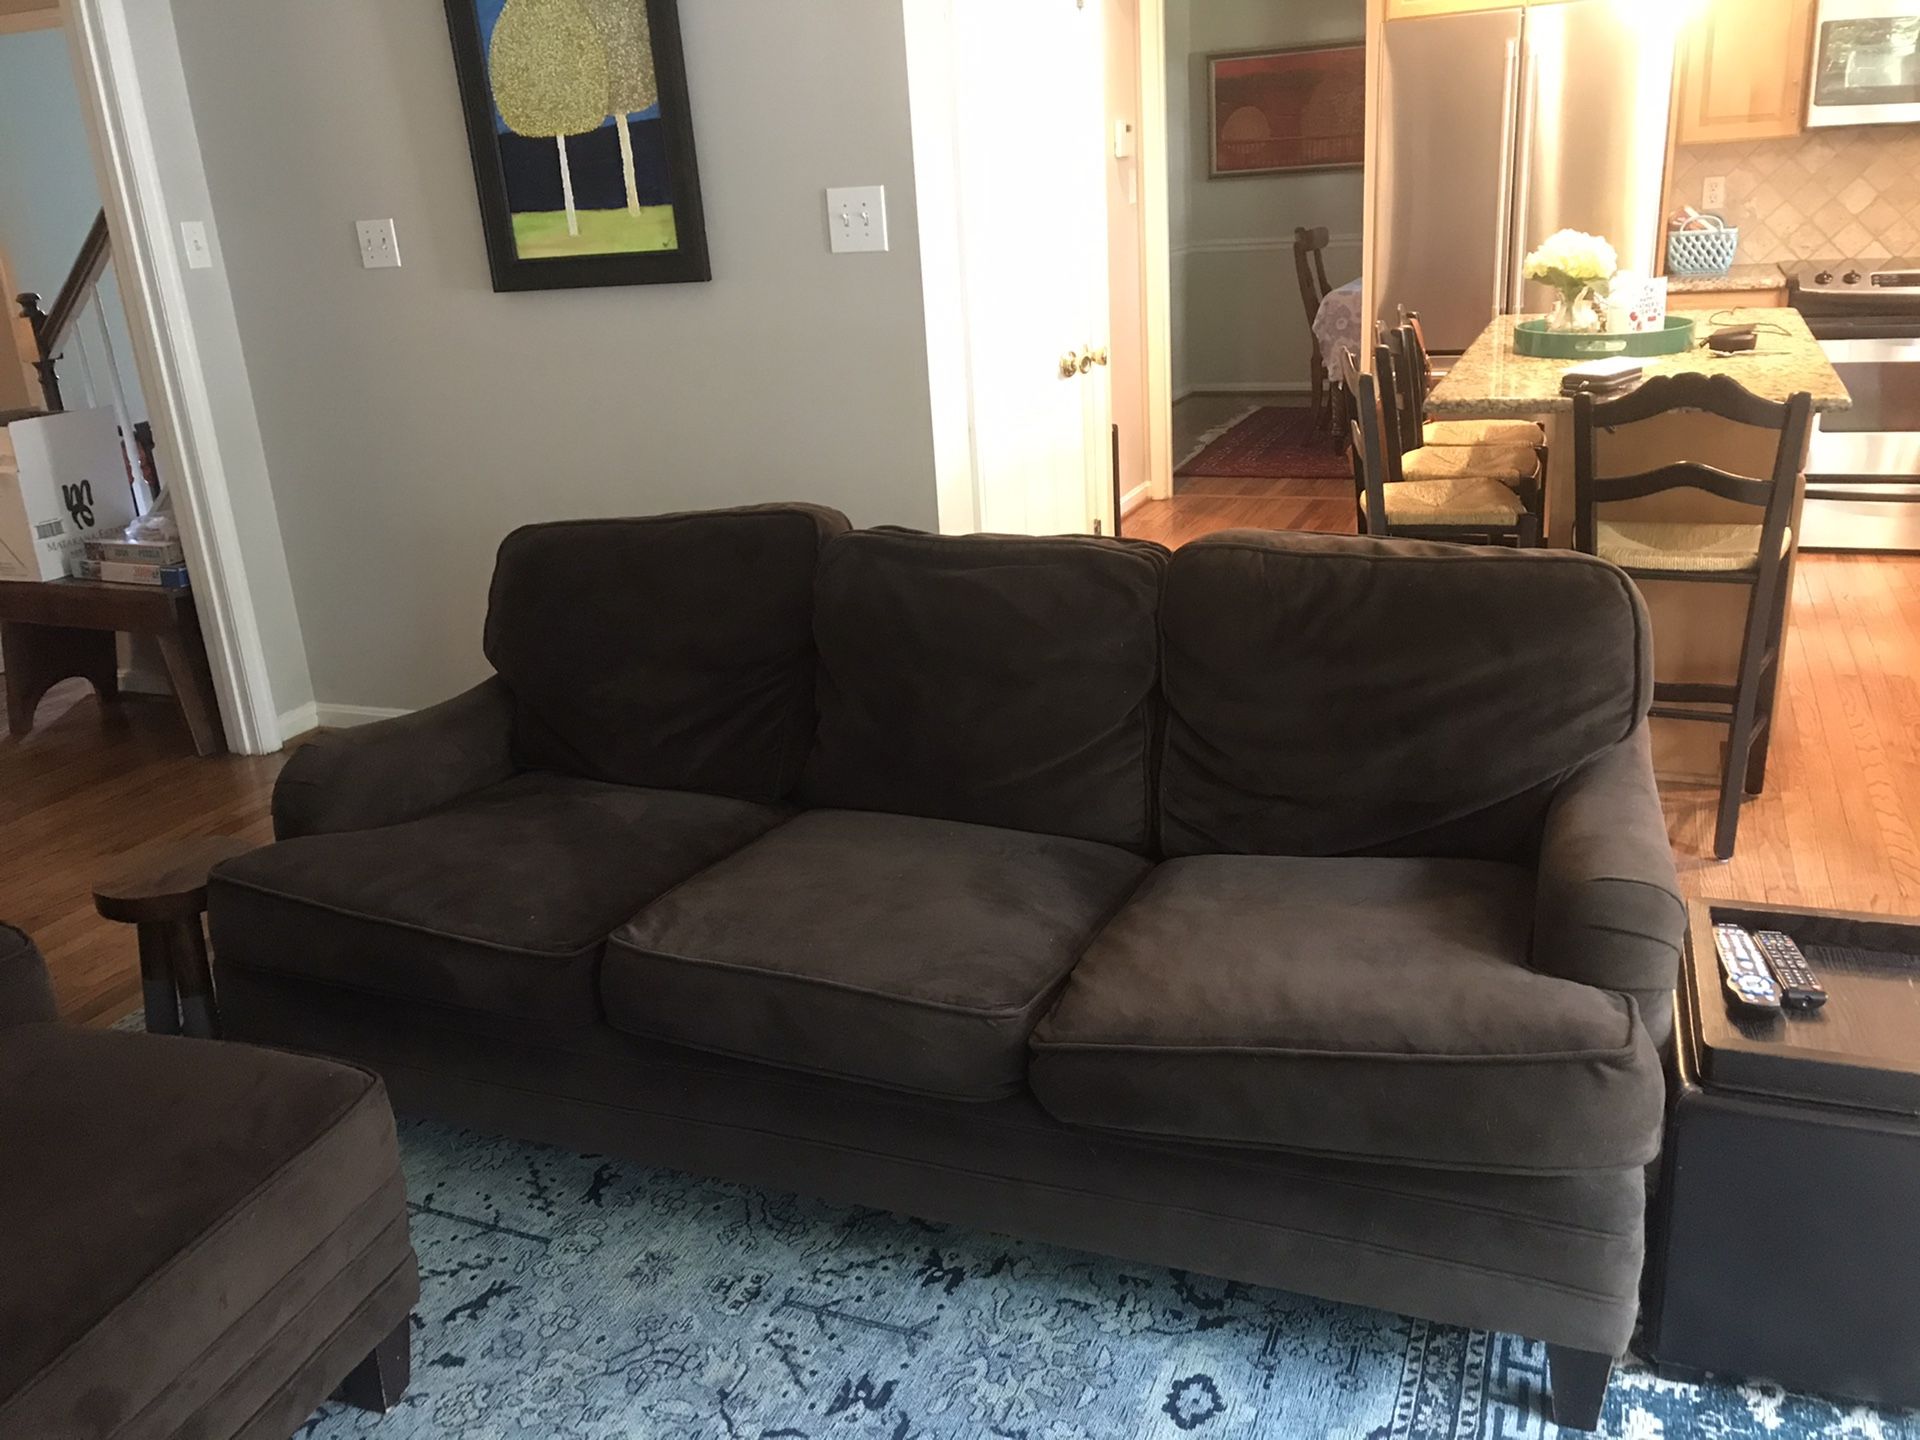 Domain couch, chair & ottoman $450 for all 3 pieces